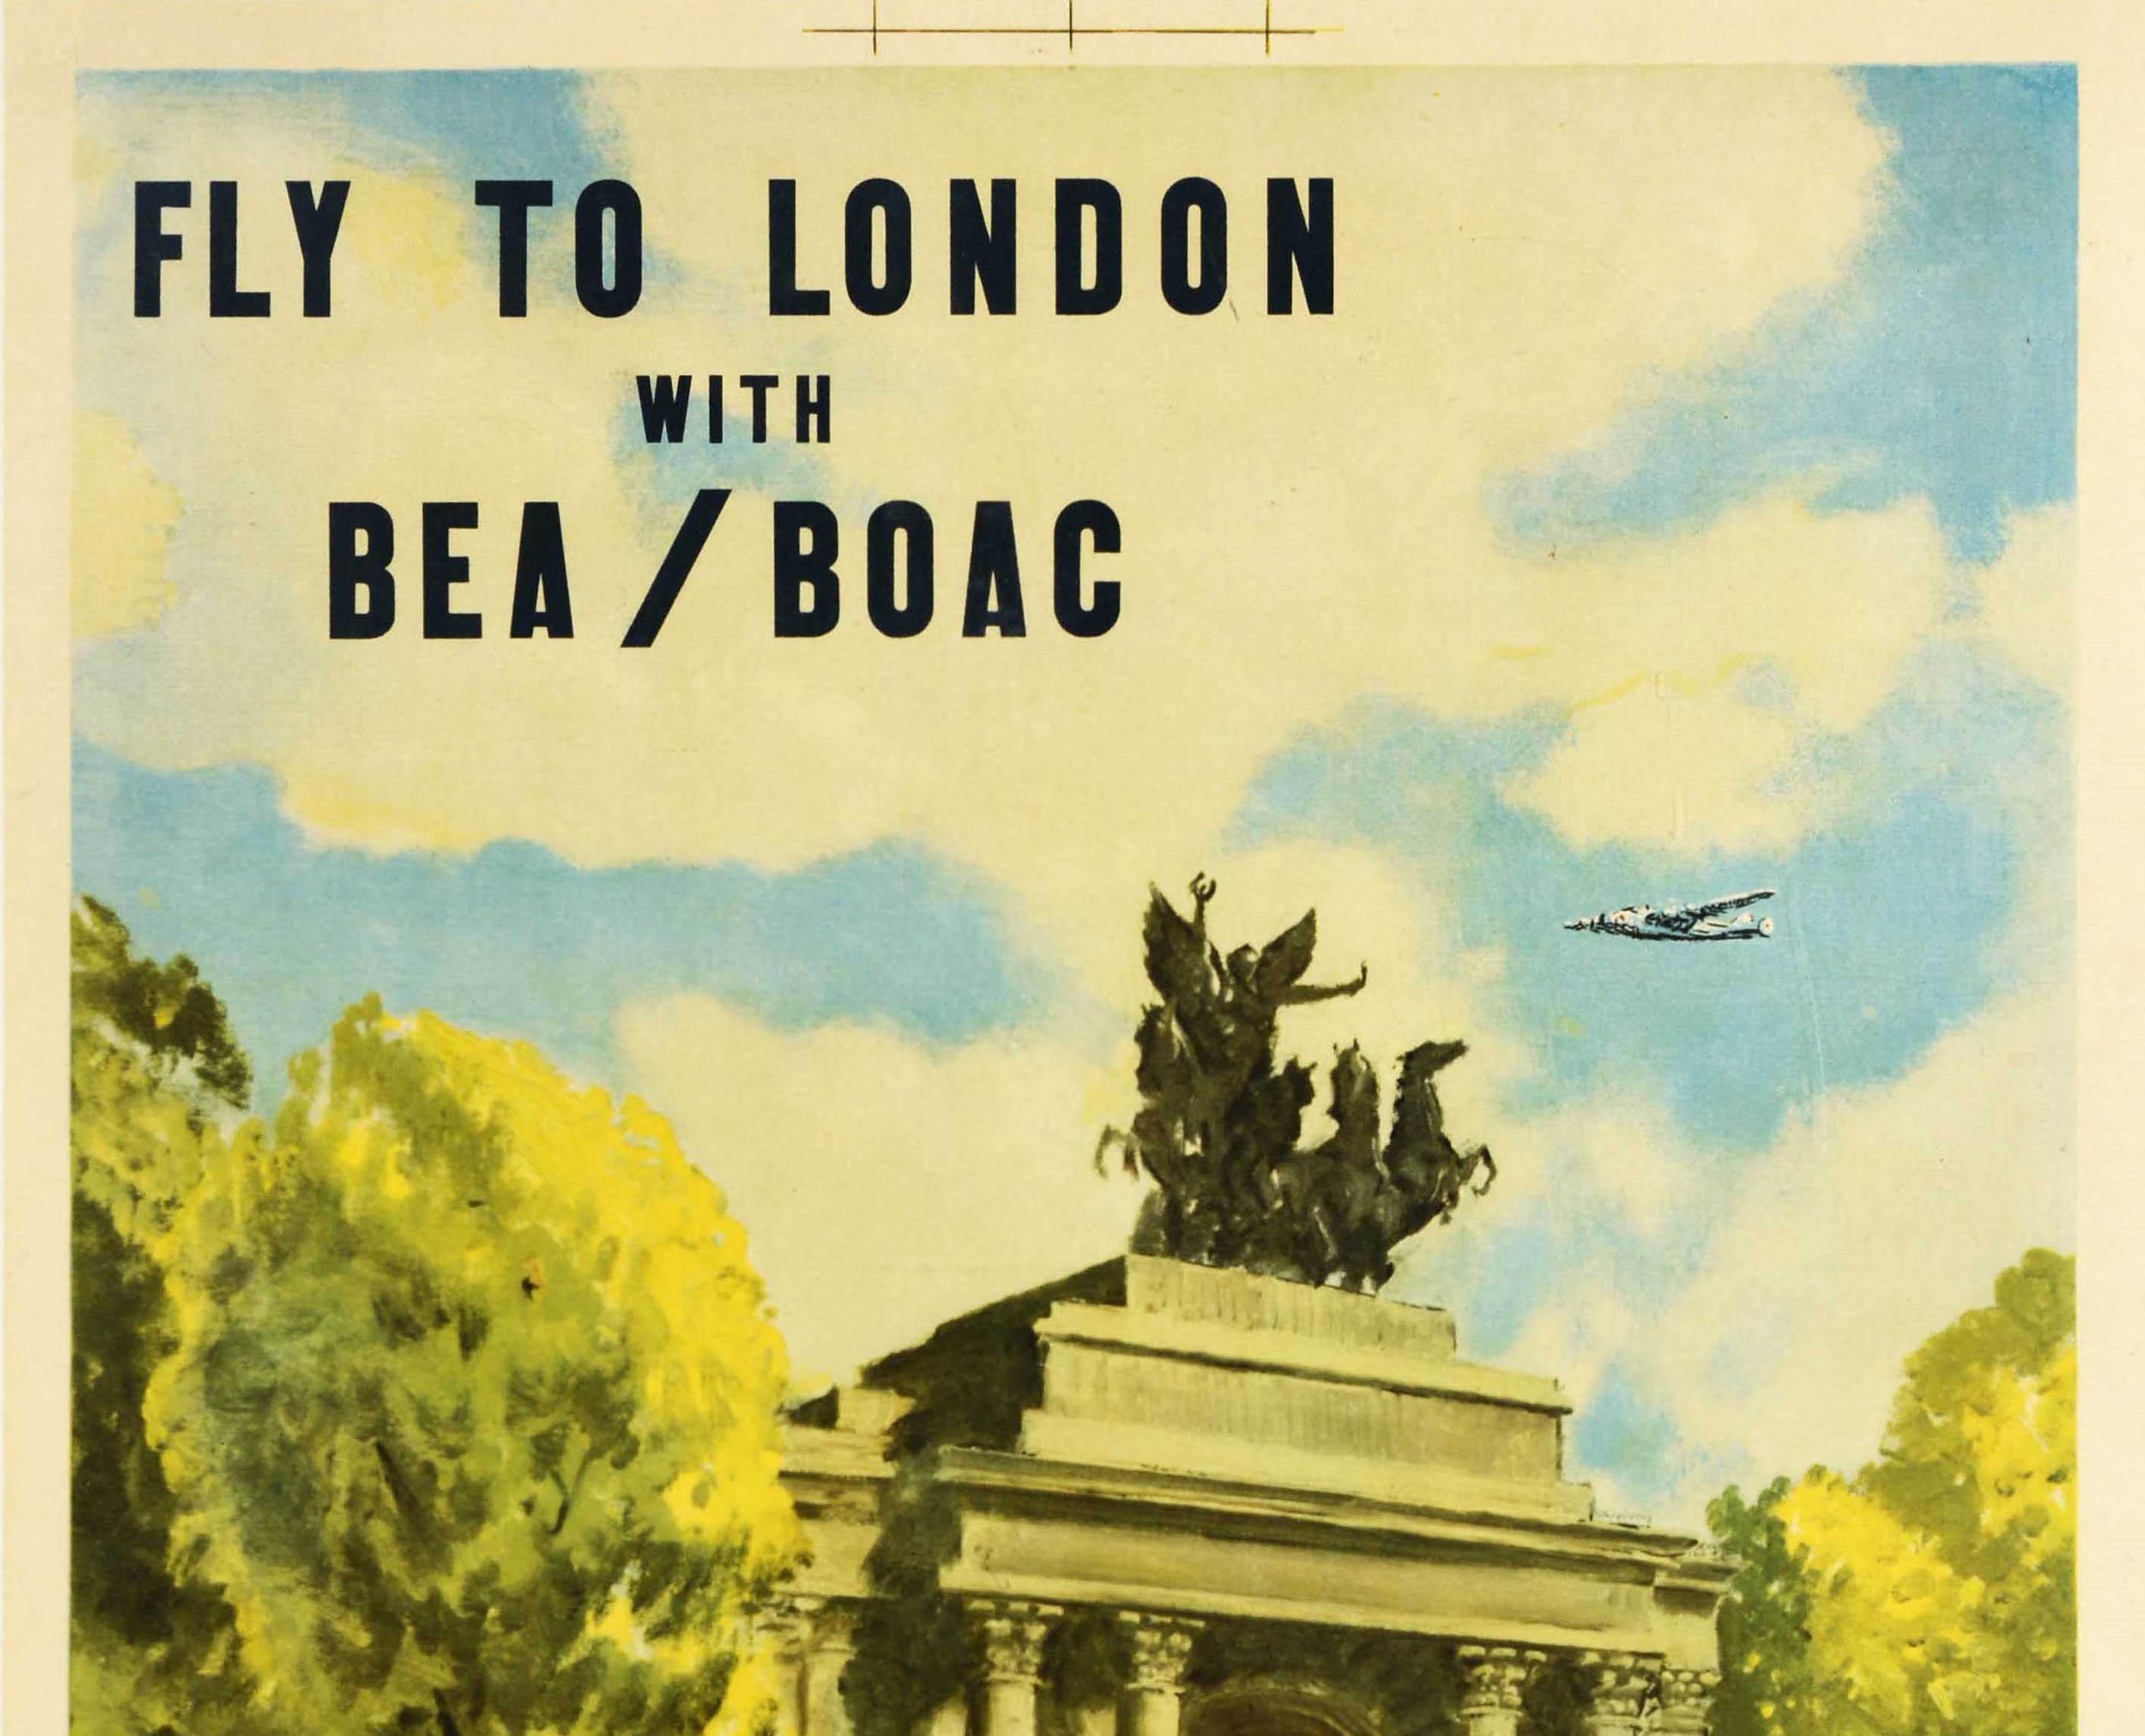 Original vintage travel poster for British European Airways and British Overseas Airways Corporation - Fly to London with BEA / BOAC - featuring a colourful image by the British artist and illustrator Clive Uptton (1911-2006) depicting a policeman